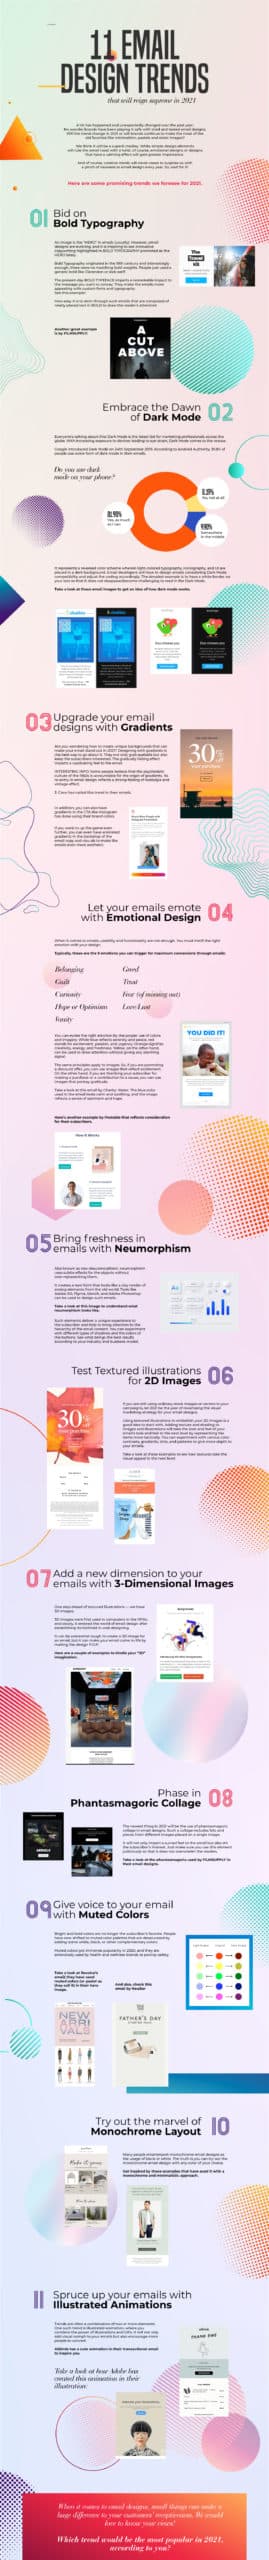 Email Design Trends Infographic